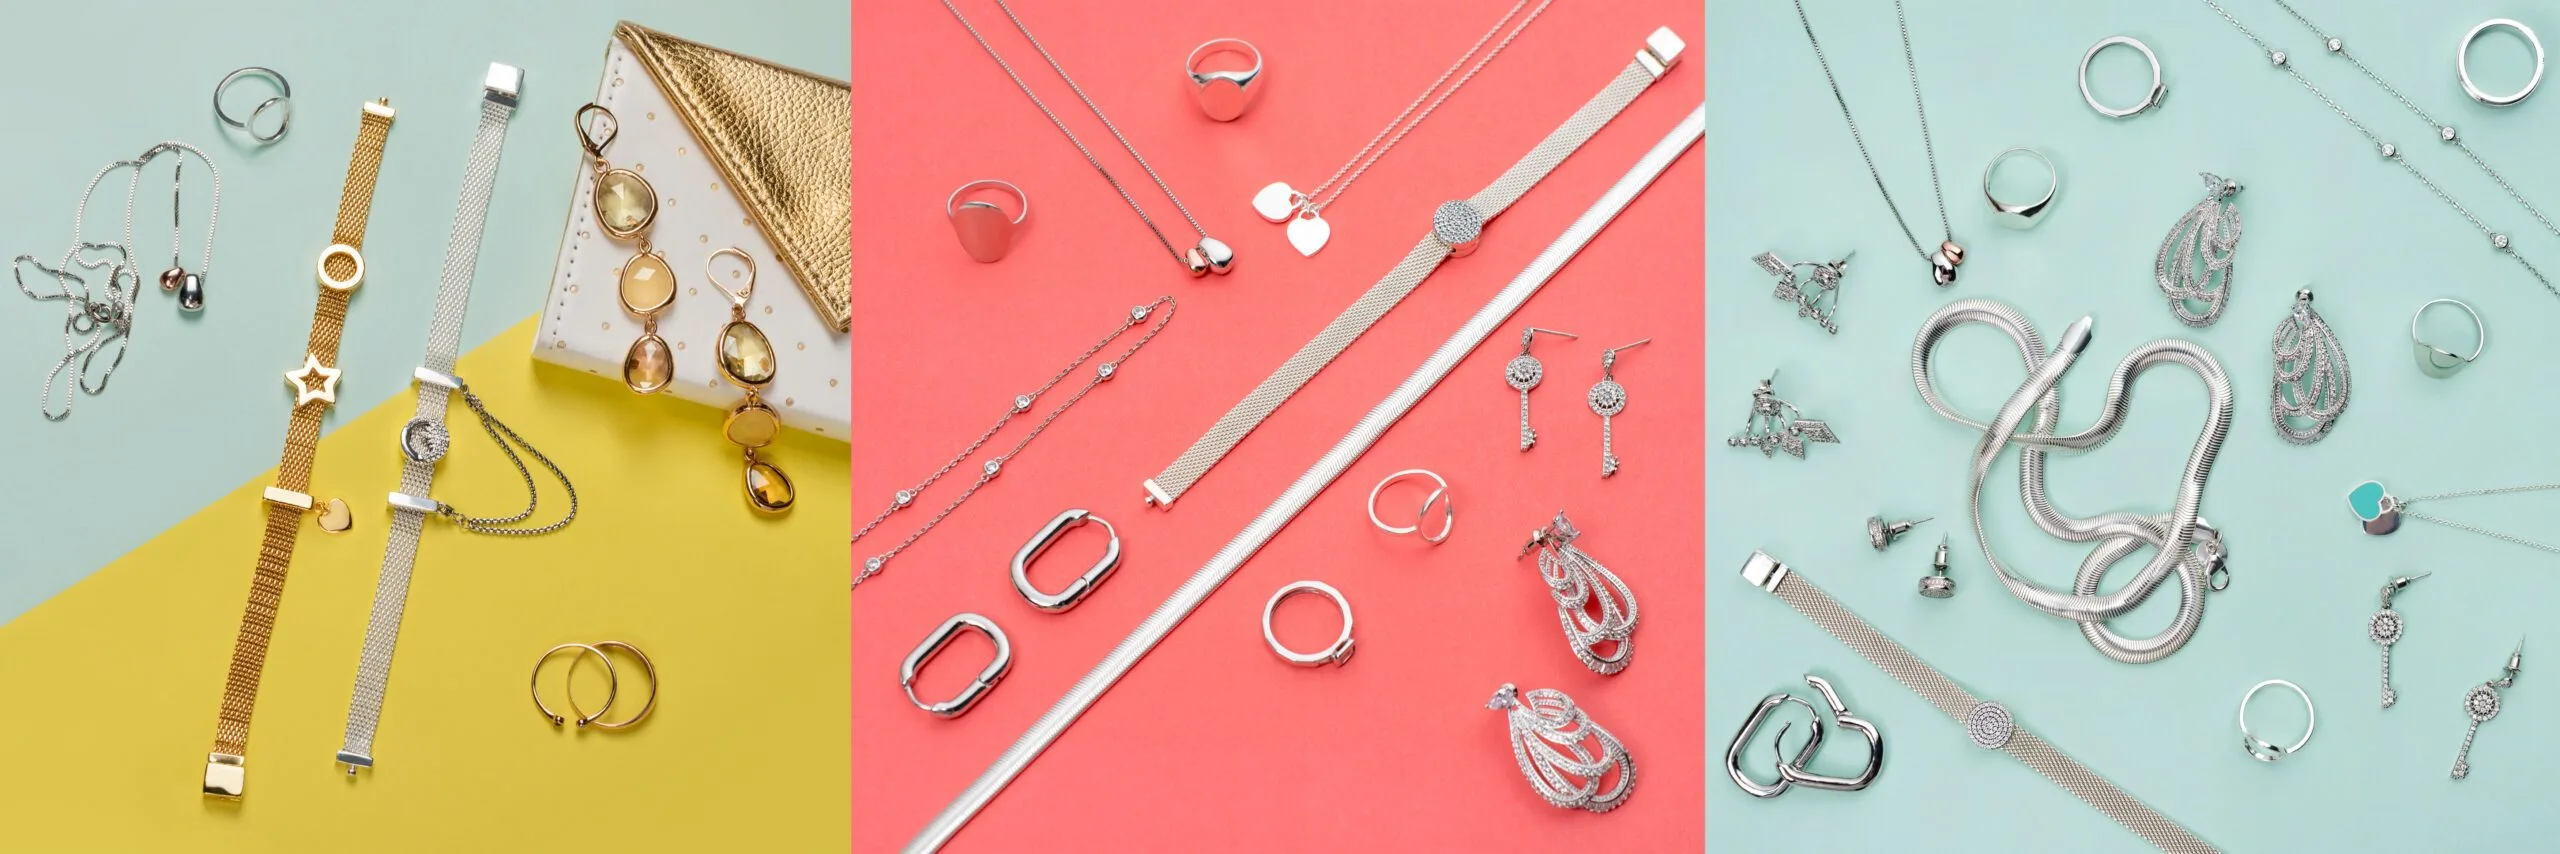 Silver and white gold jewelry on minimal colorful background. Rings, bracelets and earrings.